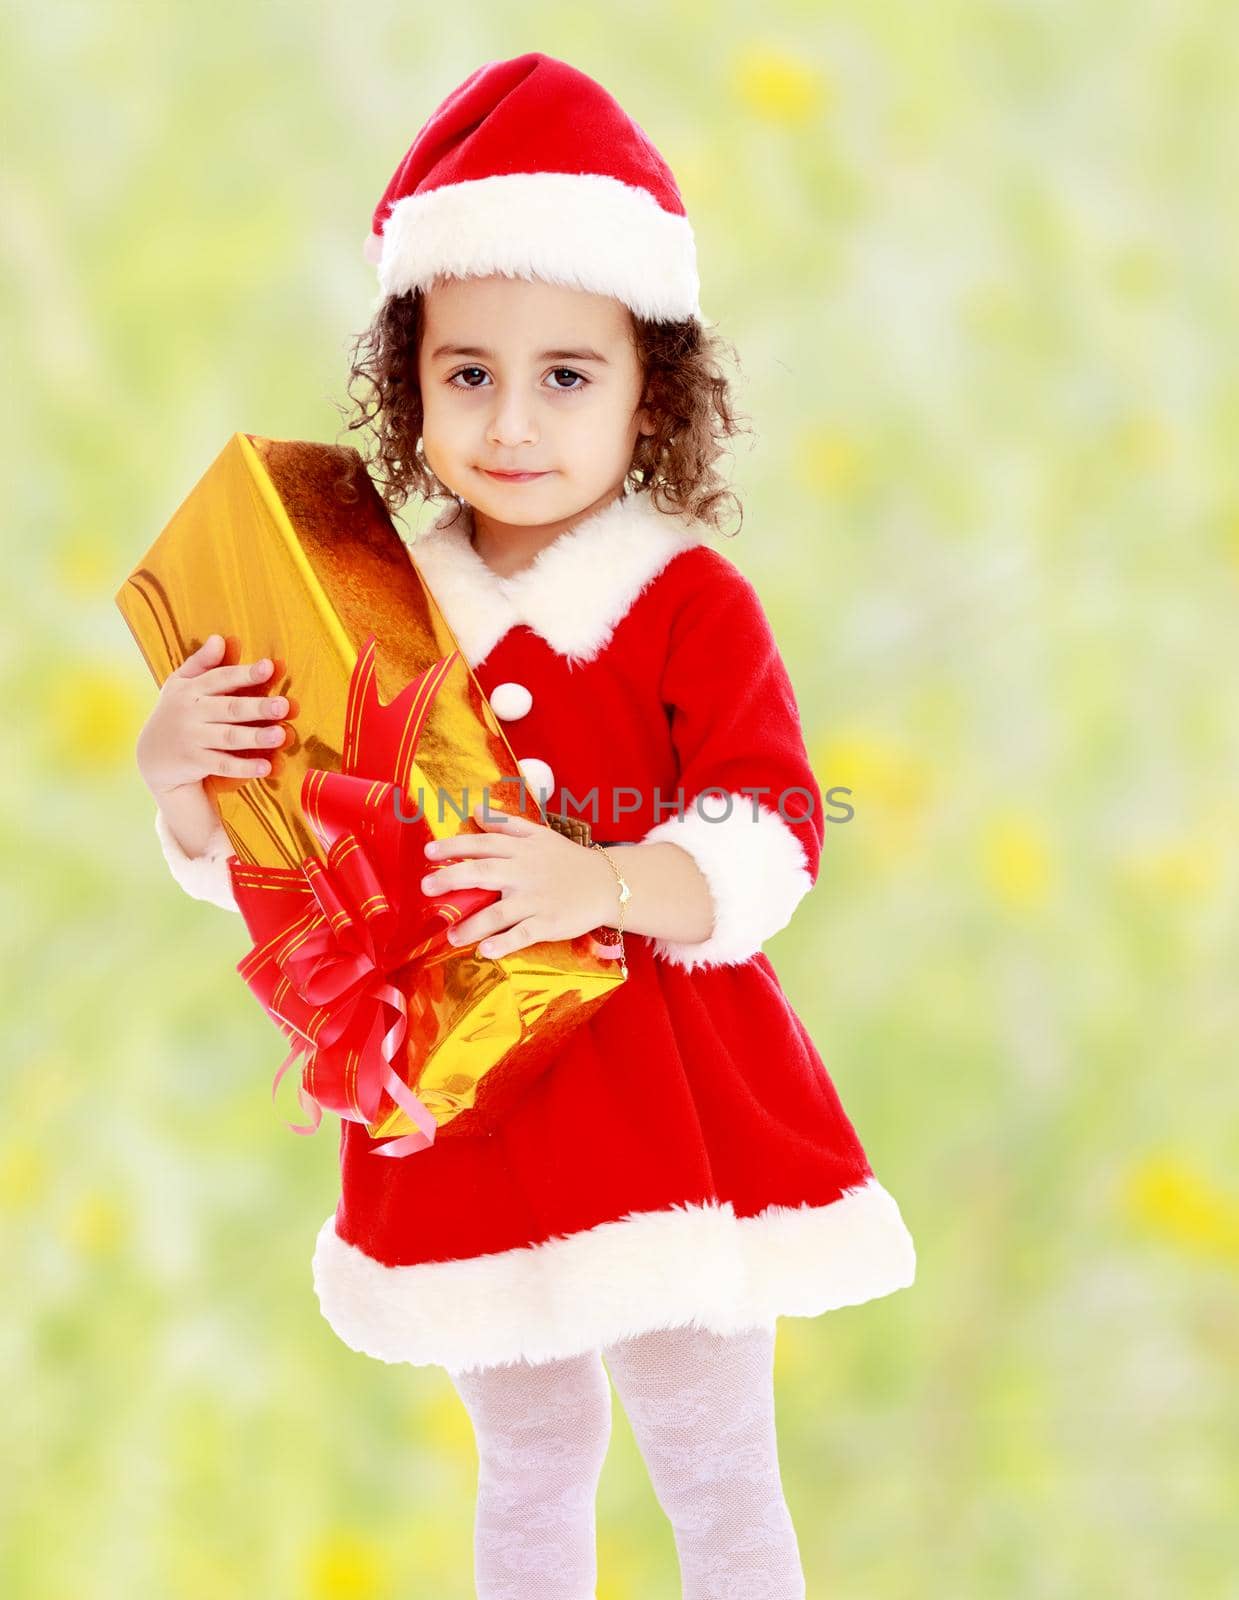 Cute little curly girl in a coat and hat of Santa Claus holding a box with a gift.Bright,floral yellow-green blurred background.